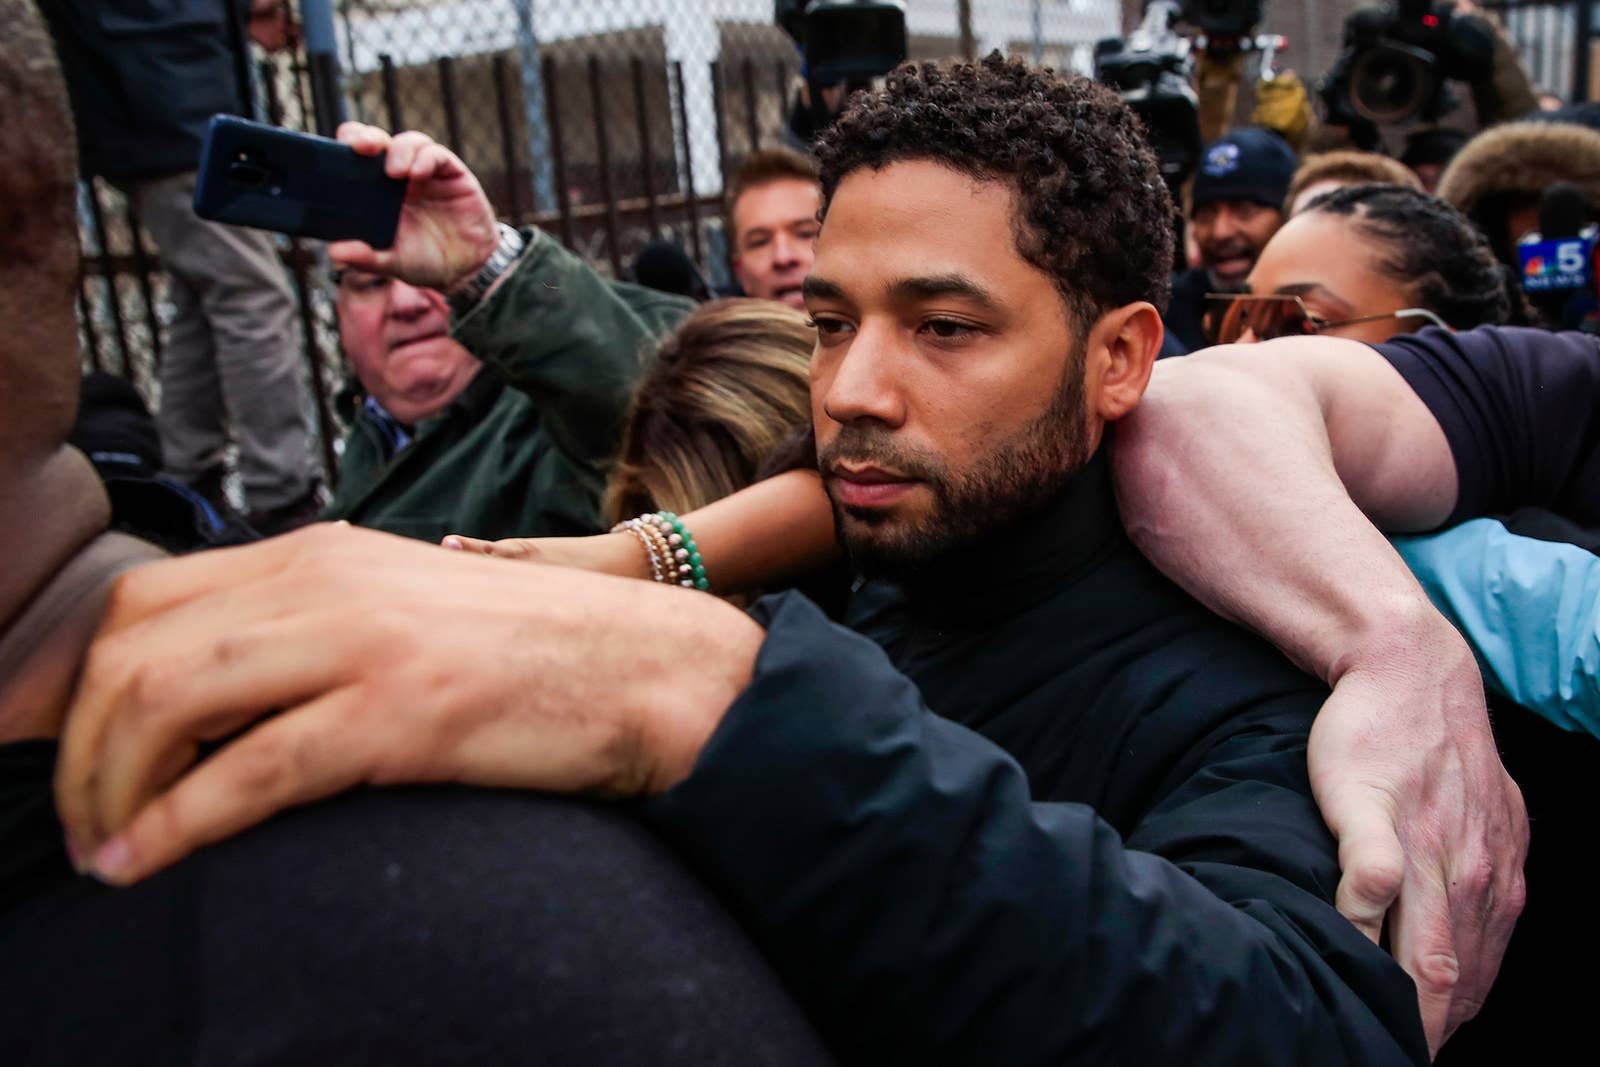 Empire actor Jussie Smollett emerges from the Cook County Court complex after posting 10% of a $100,000 bond in Chicago, on Feb. 21, 2019. Smollett was charged with felony disorderly conduct for allegedly filing a false police report claiming he was attacked in an incident that has drawn national attention.